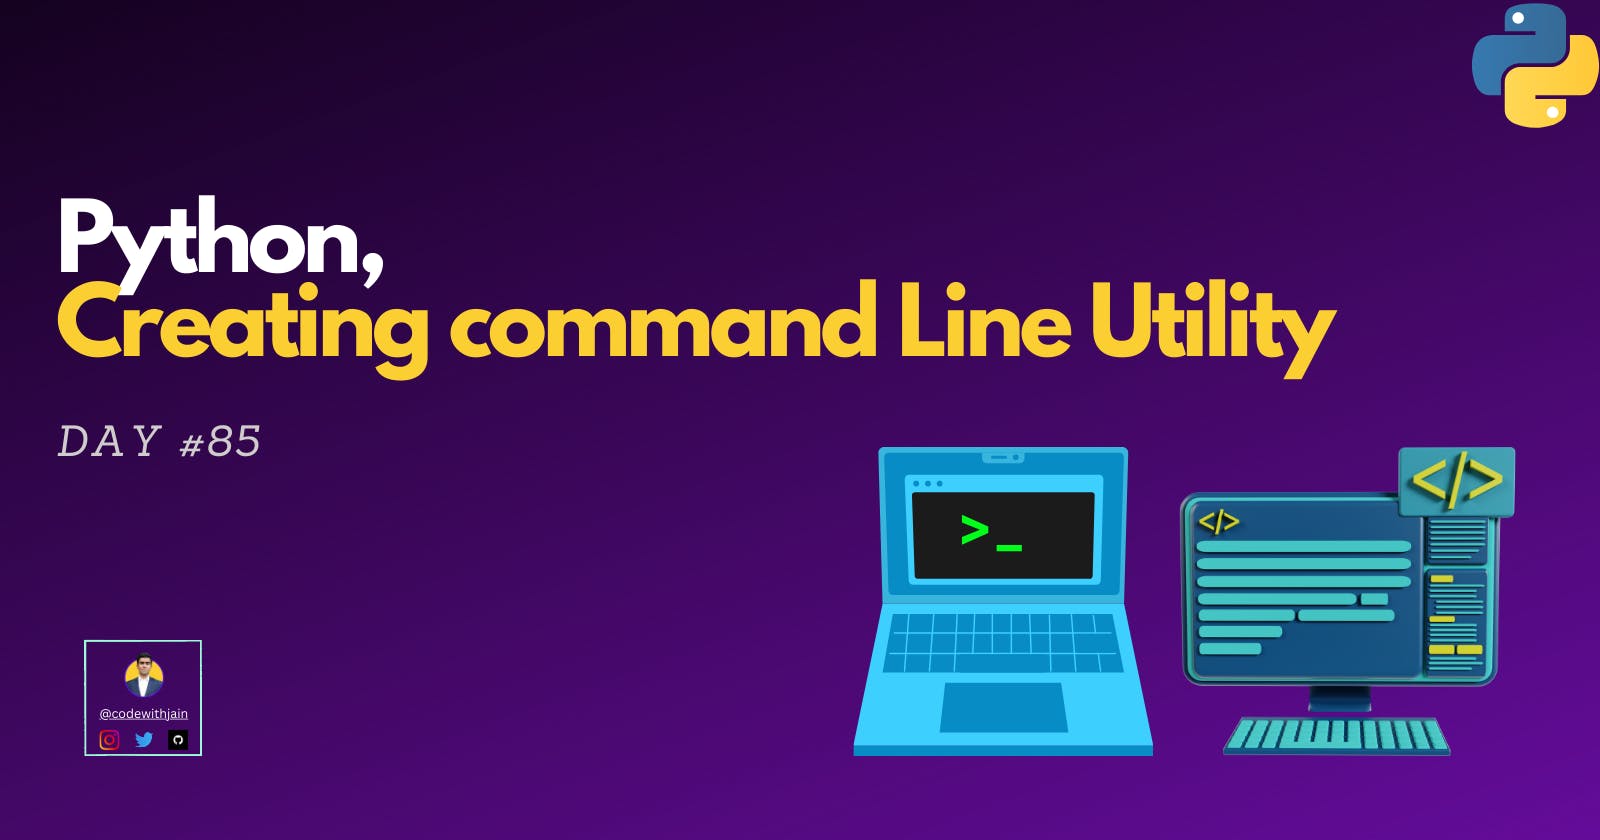 Day #85 - Creating command line utility in python